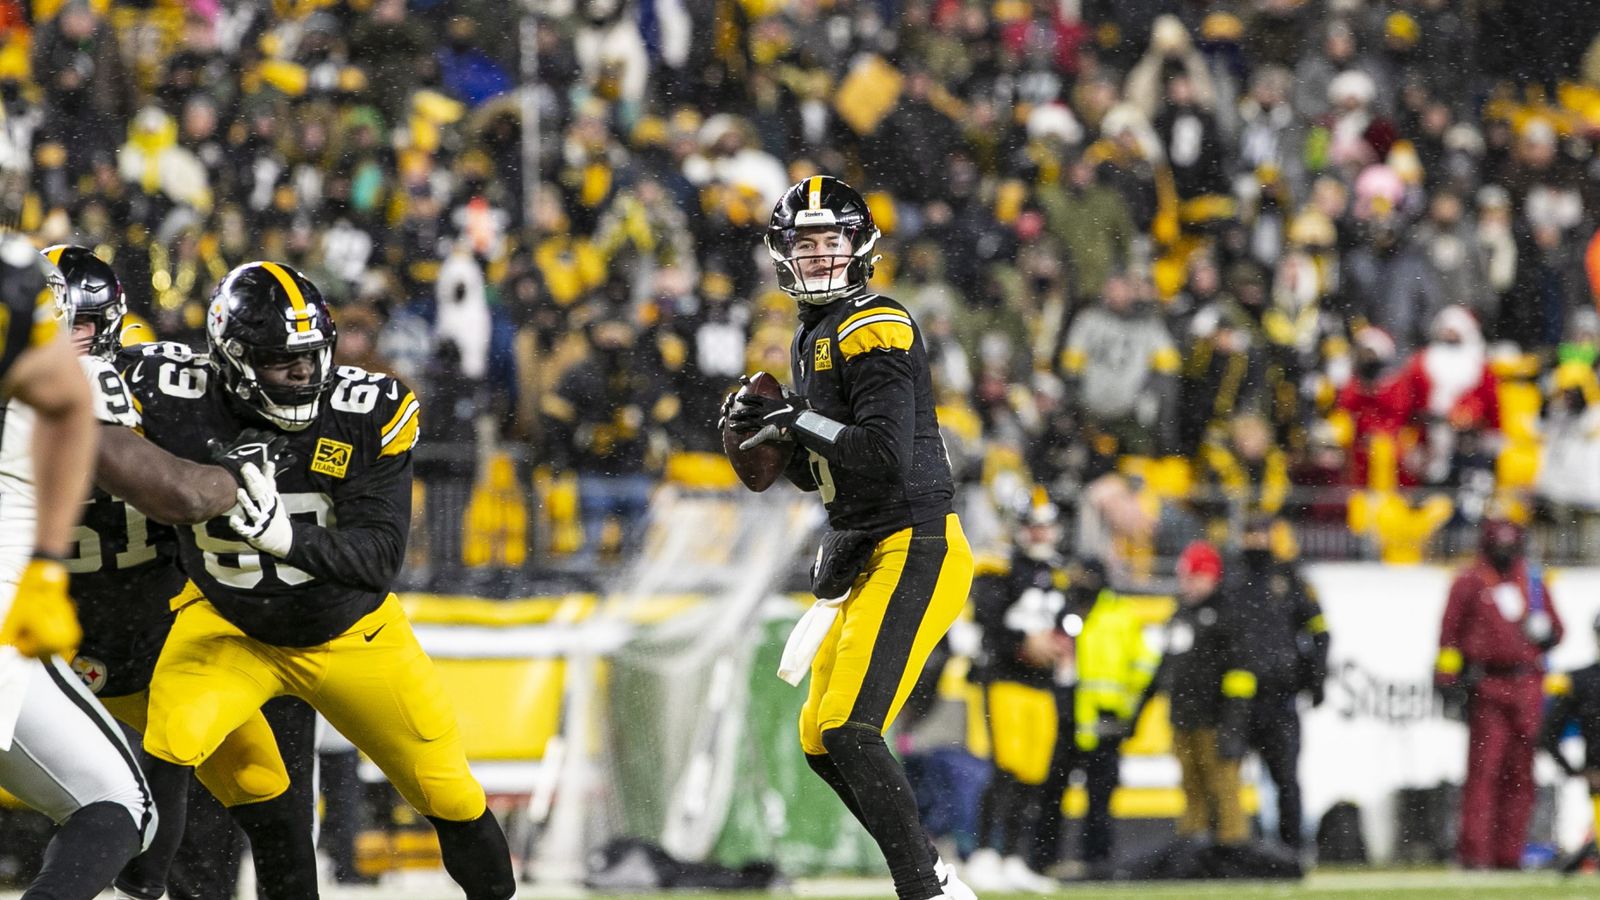 NBC Analyst Cris Collinsworth Compares Steelers Rookie QB1 Kenny Pickett To  Patrick Mahomes After Game-Winning Drive